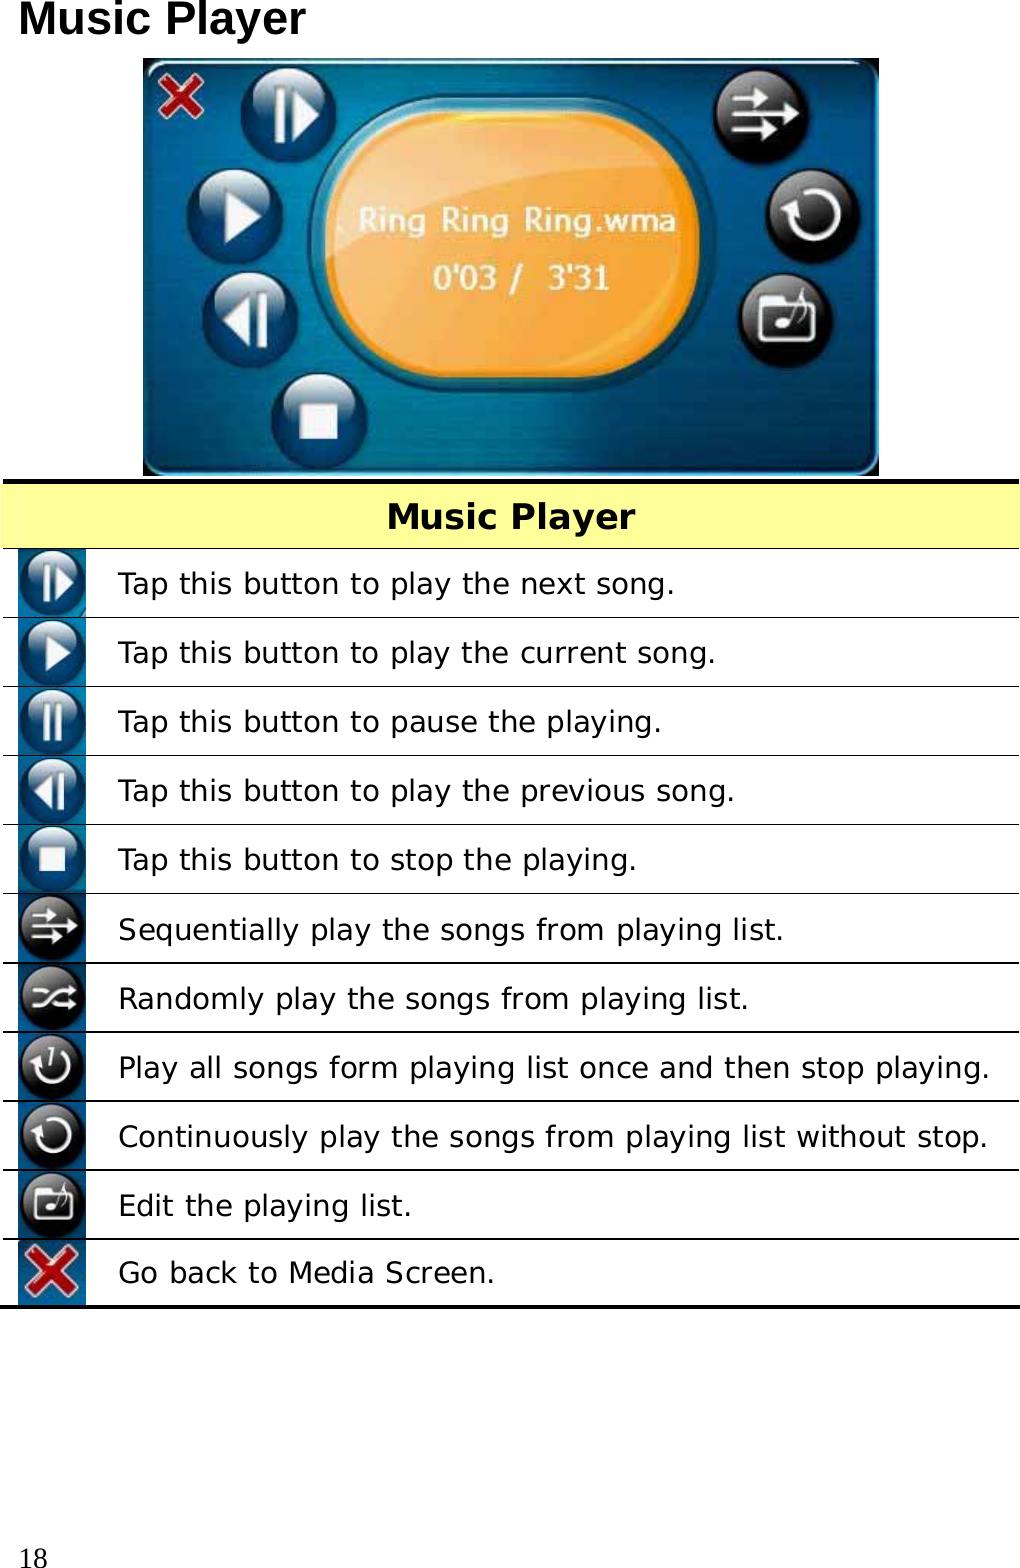  18 Music Player  Music Player  Tap this button to play the next song.  Tap this button to play the current song.  Tap this button to pause the playing.  Tap this button to play the previous song.  Tap this button to stop the playing.  Sequentially play the songs from playing list.  Randomly play the songs from playing list.  Play all songs form playing list once and then stop playing.  Continuously play the songs from playing list without stop.  Edit the playing list.  Go back to Media Screen.  